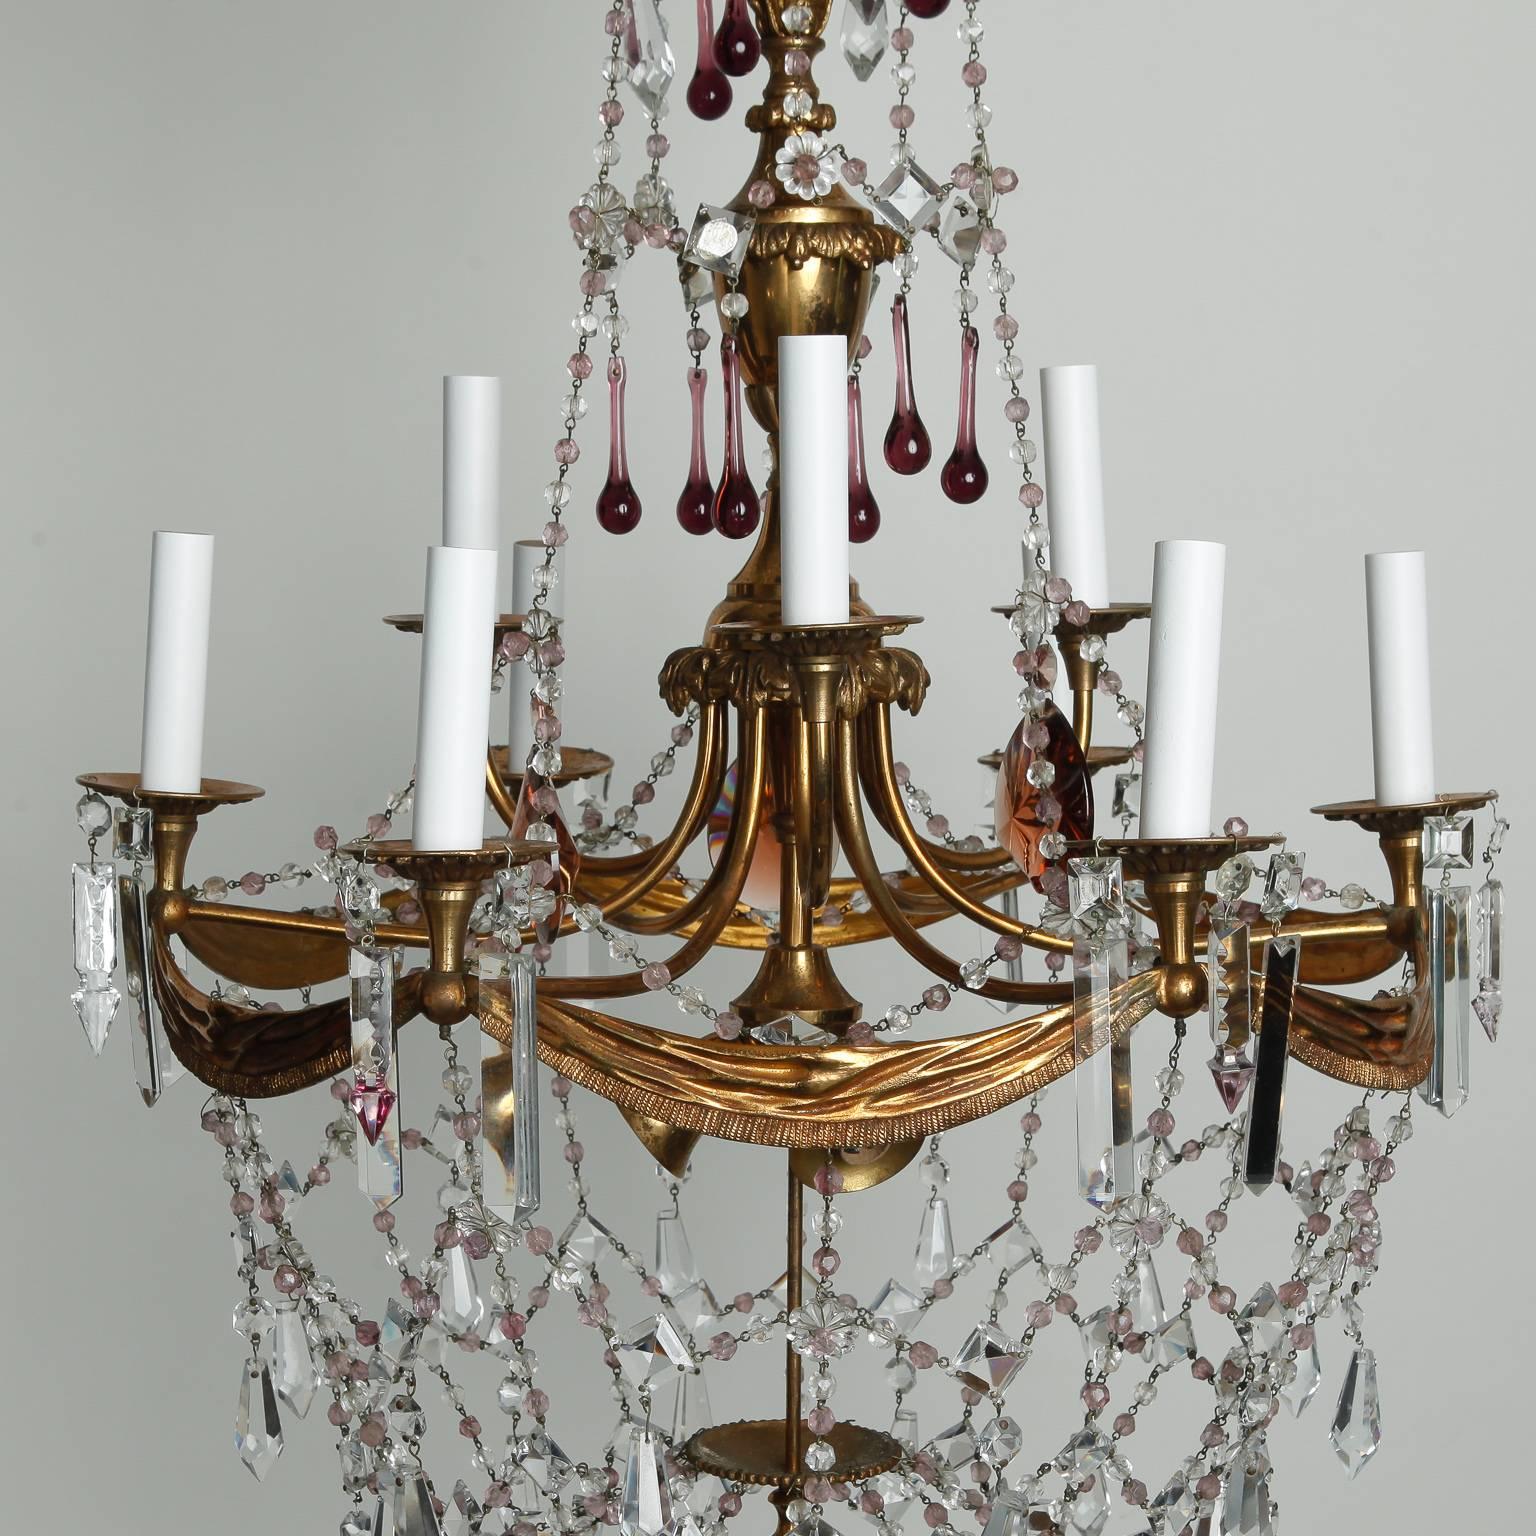 French chandelier with brass frame, tole details and two tiers of candle arms, circa 1900 There are a total of 12 sockets with three candle arms on the top tier, six on the lower level and three down lights. Crystal draped beading and several large